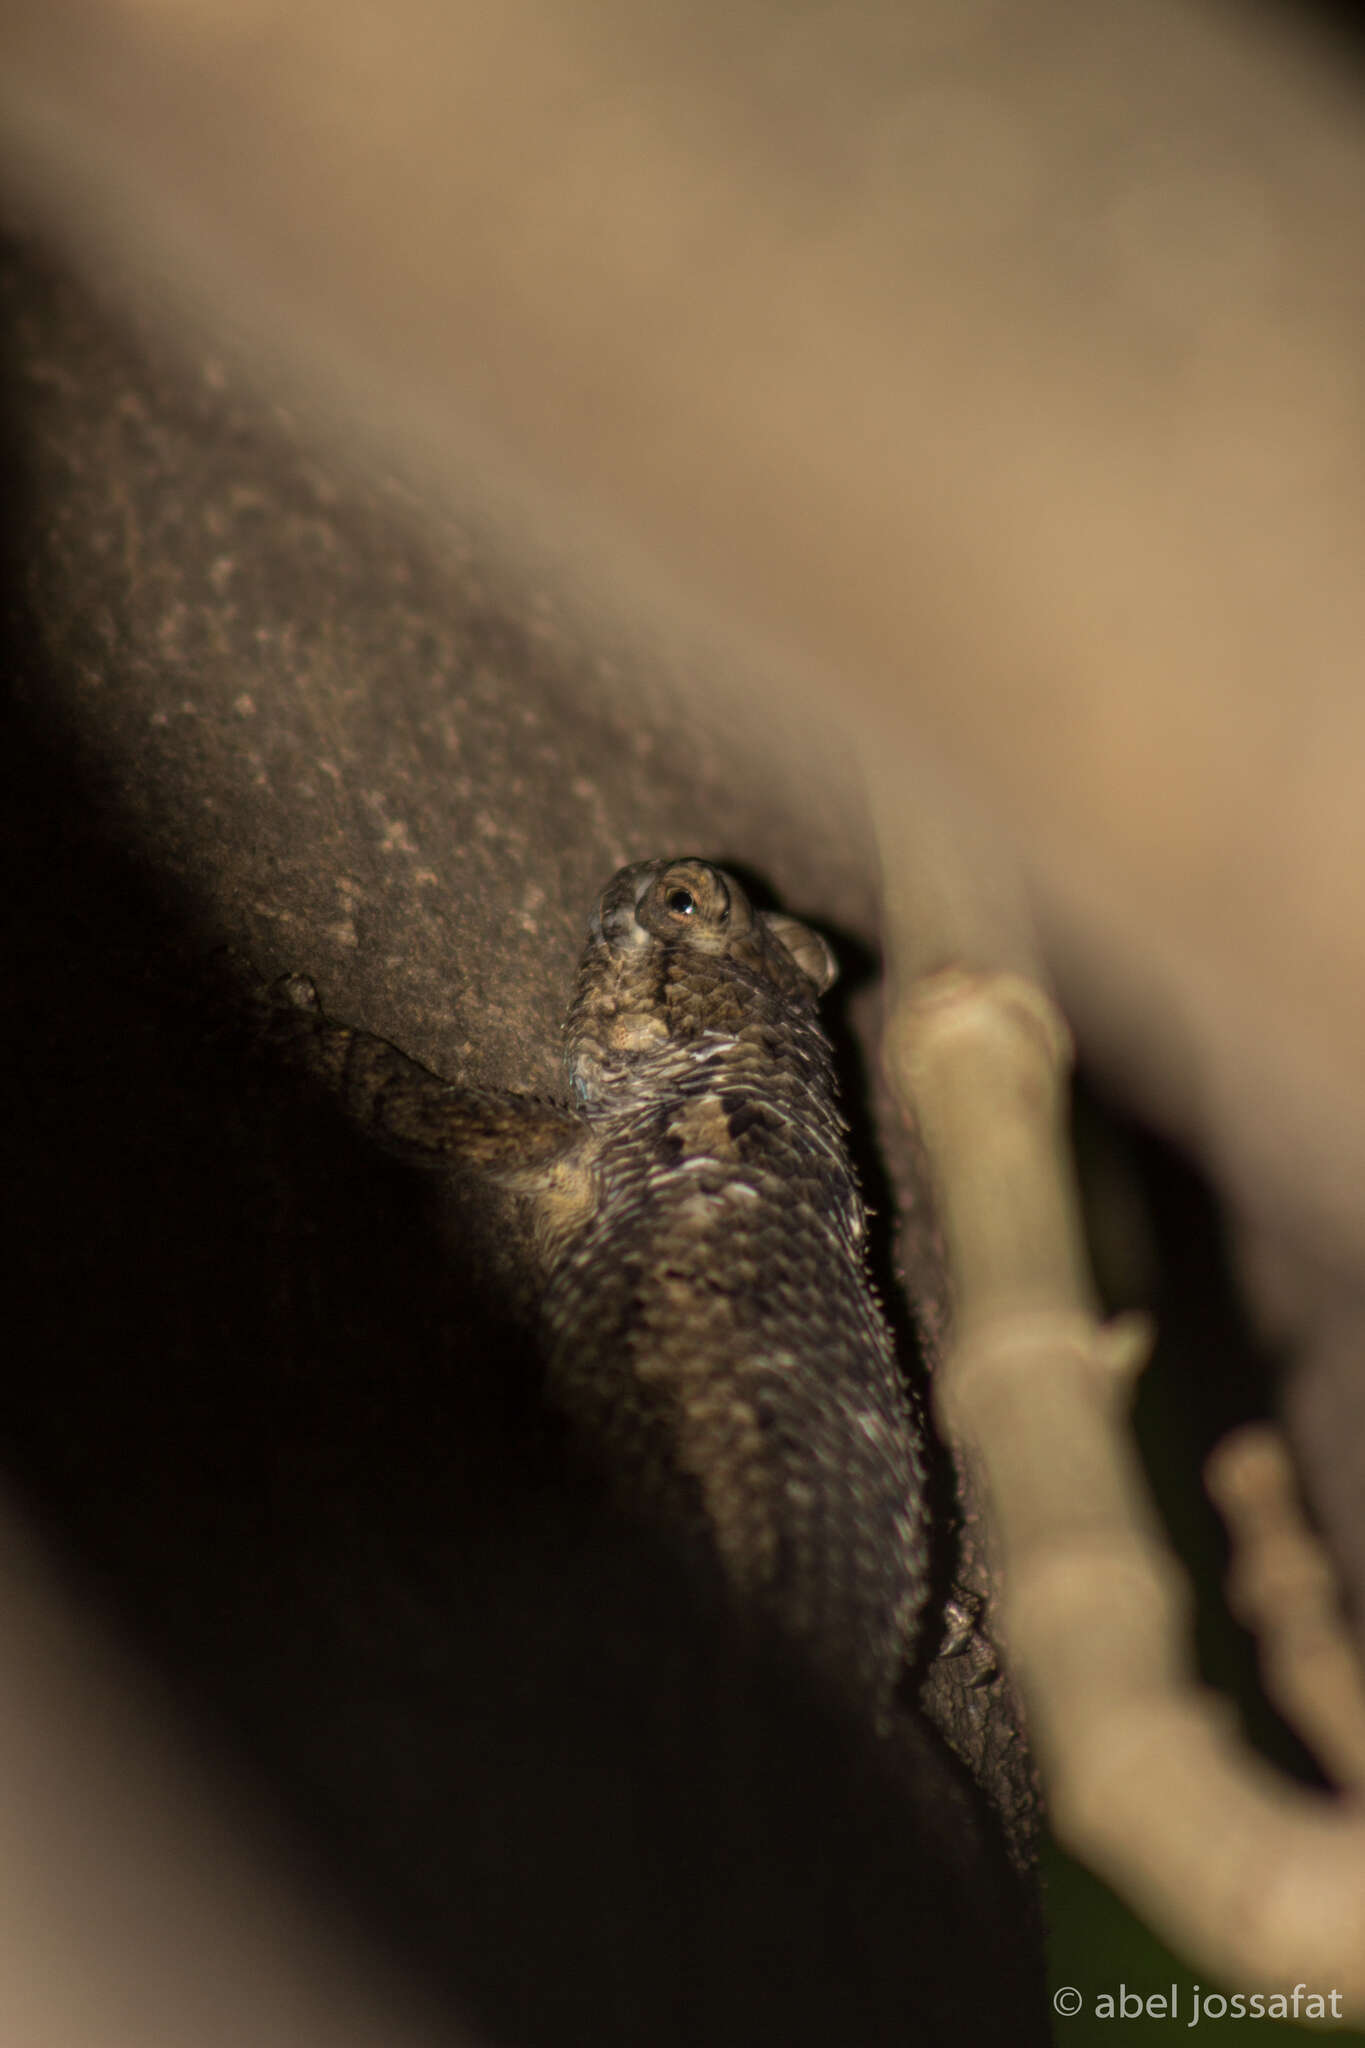 Image of Taylor's Spiny Lizard